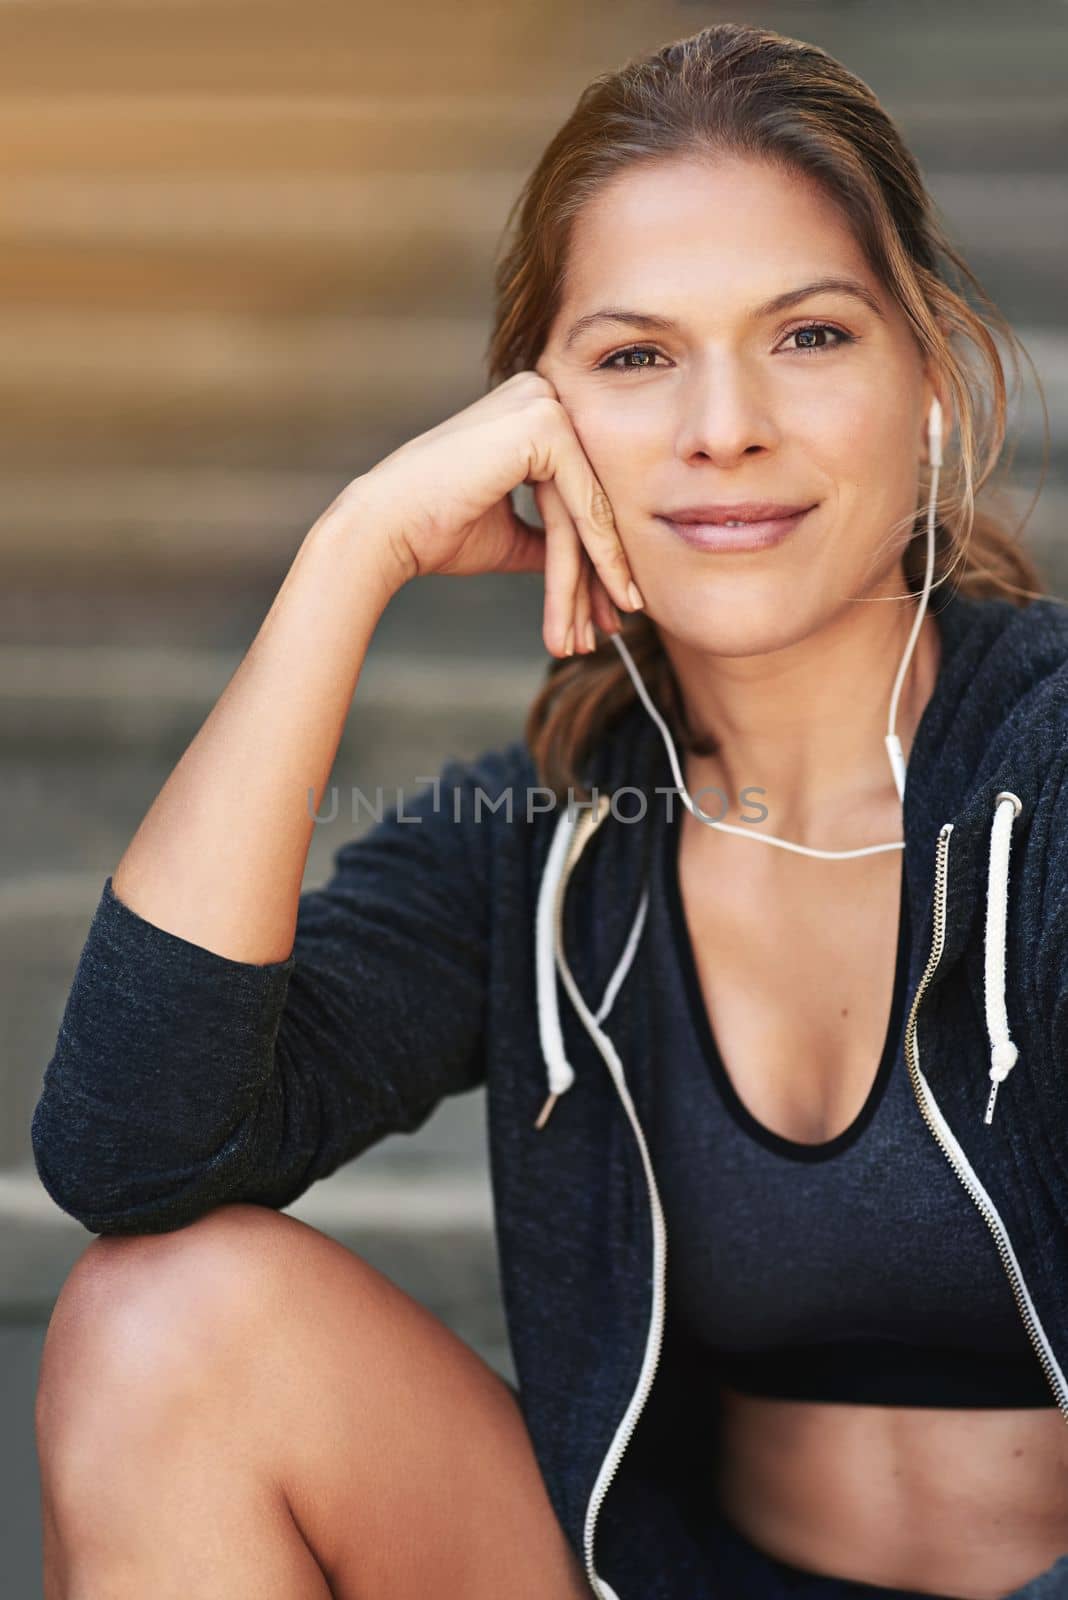 Fitness is my way of life. Cropped portrait of an attractive young athlete exercising outdoors